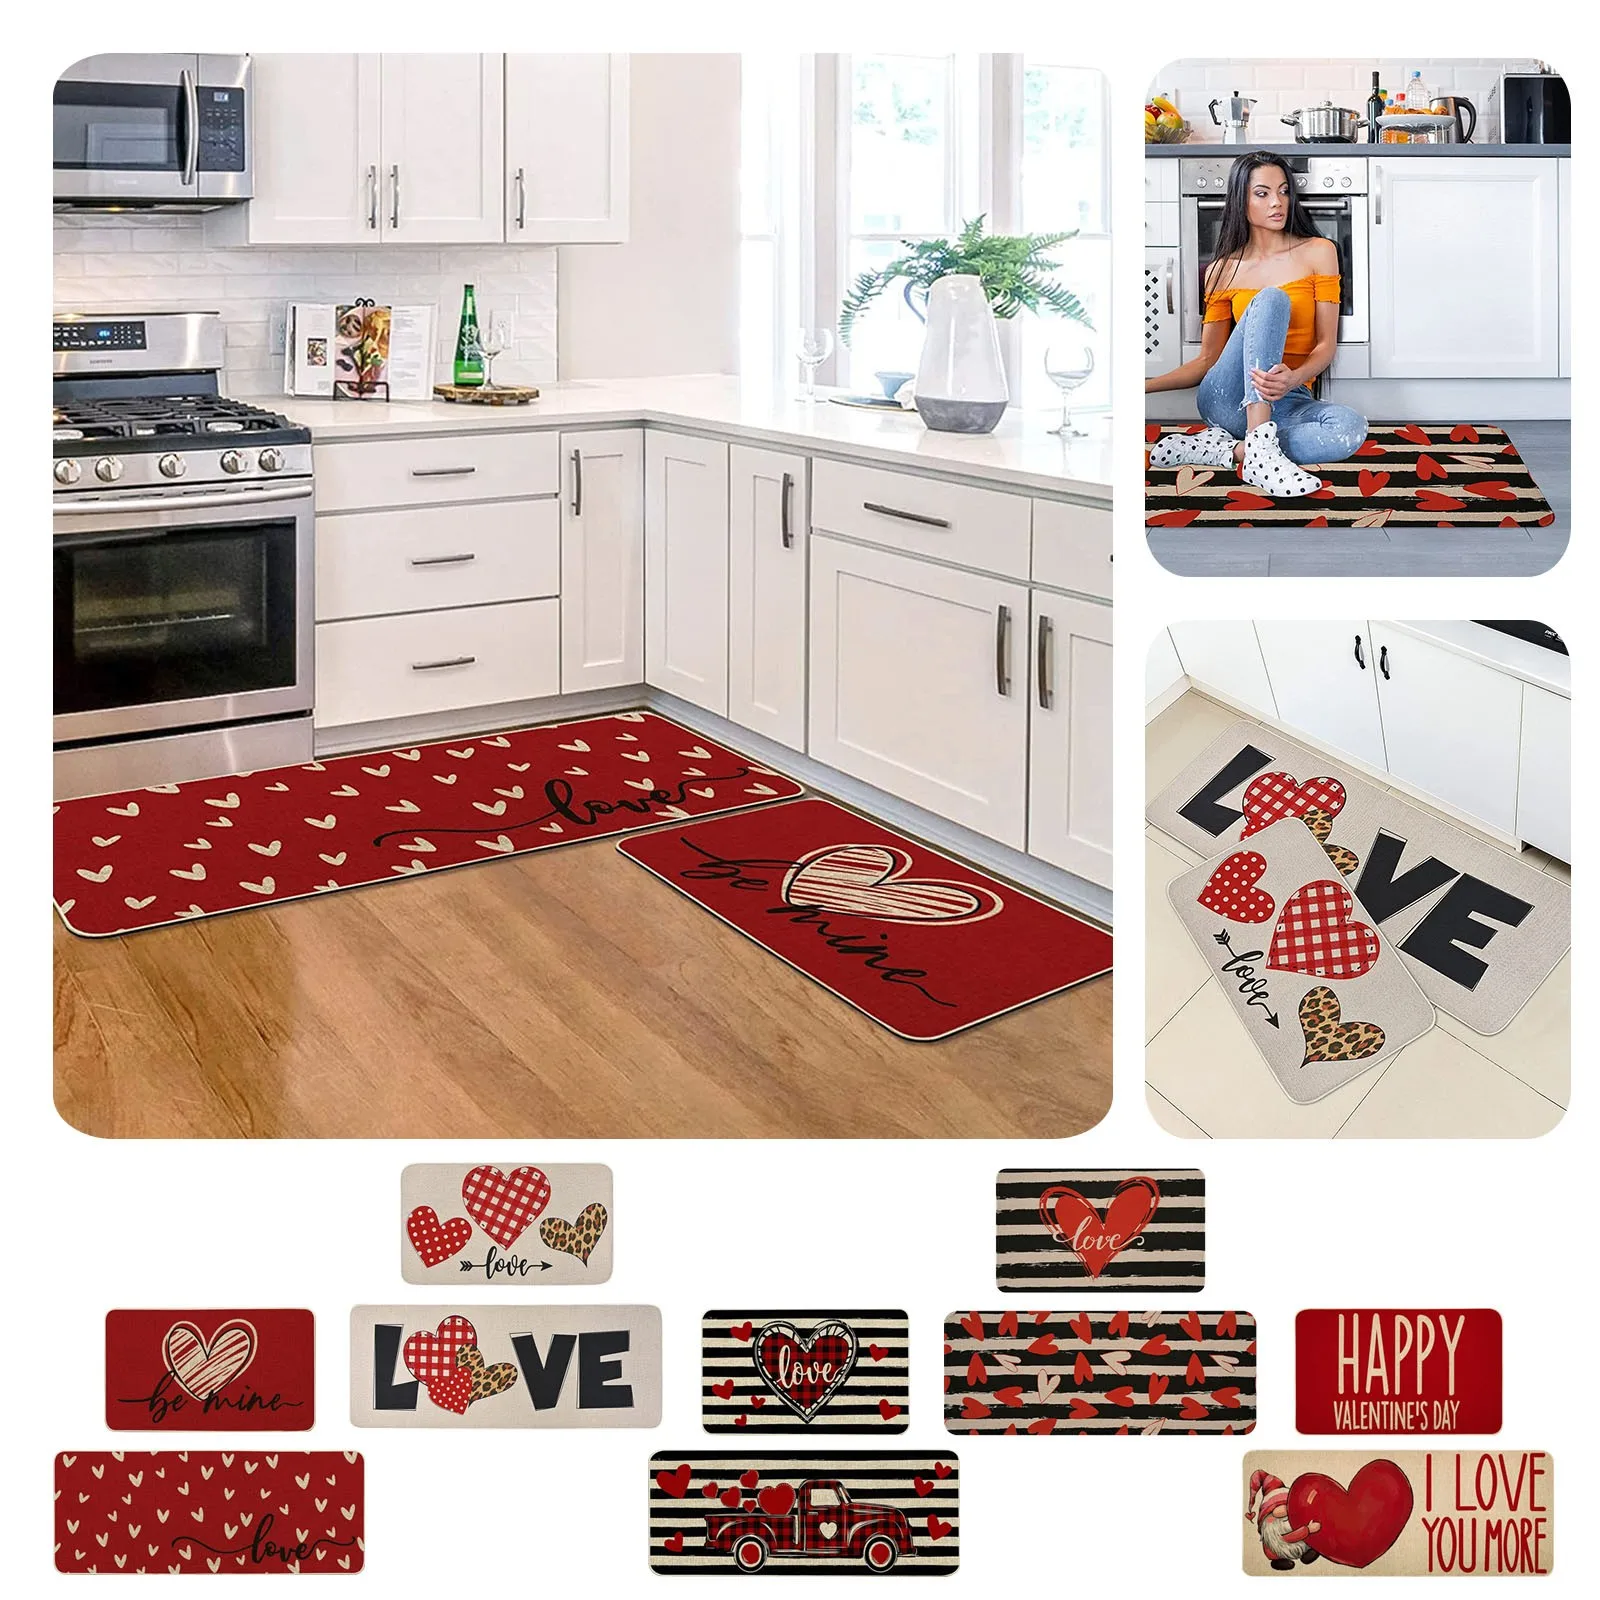 Kitchen Rugs And Mats Set Of 2 Cushioned Anti Fatigue Kitchen